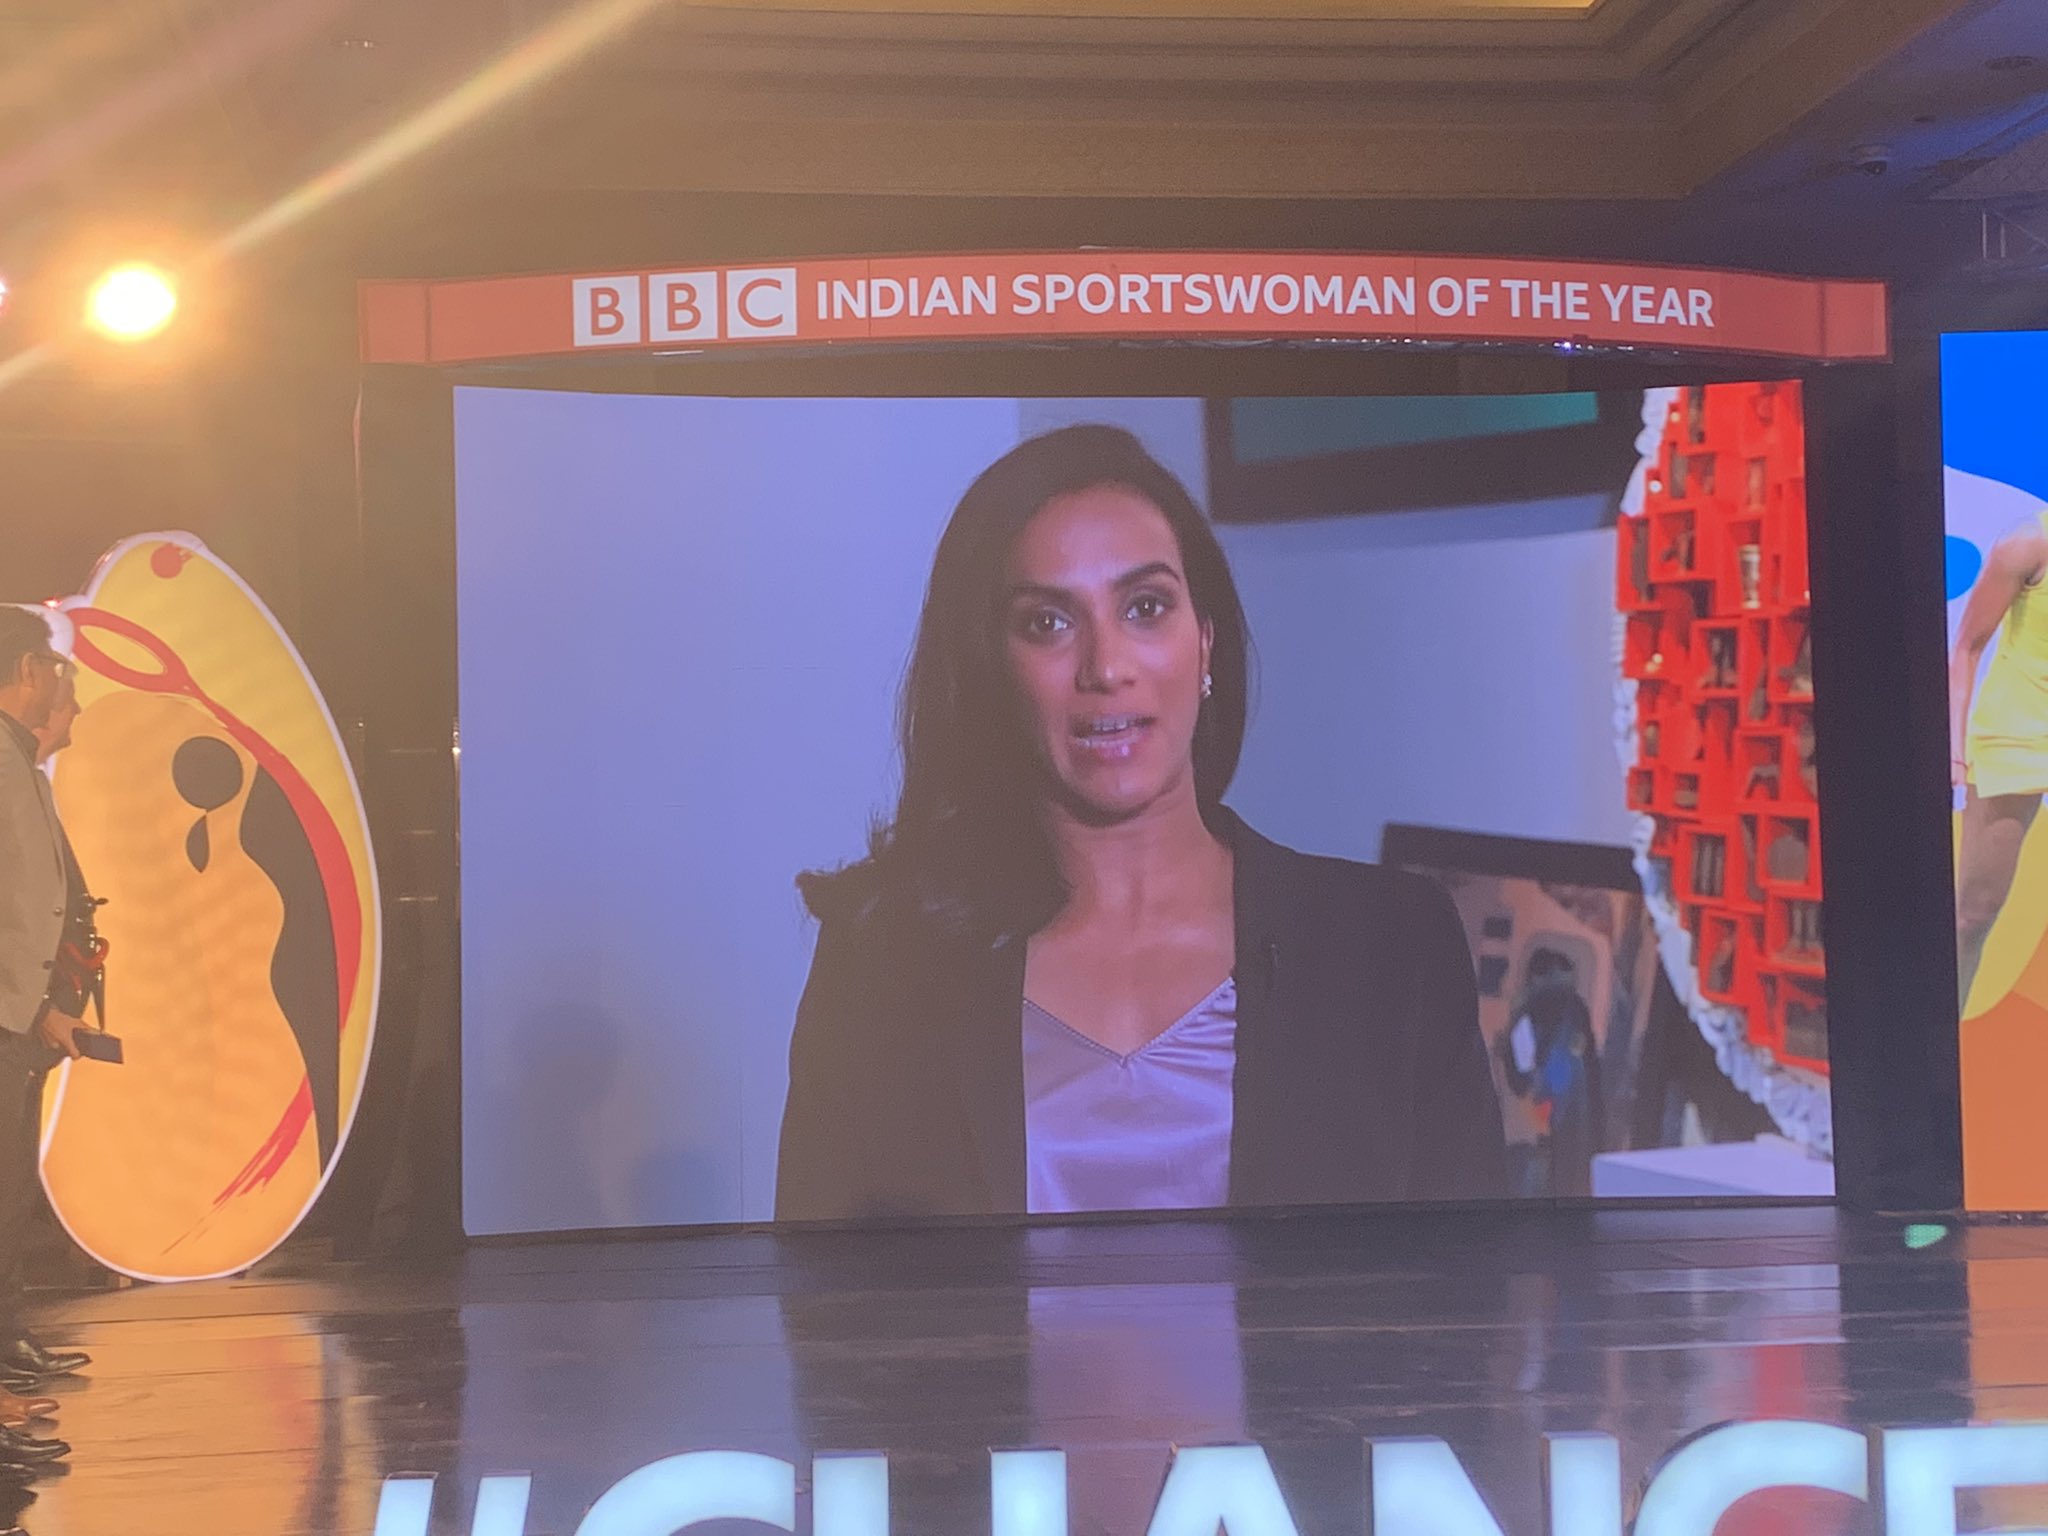 PV Sindhu has a total of five World Championship medals to her name. She is also the first Indian singles badminton player to win an Olympic silver medal.  (Image: Jamie Angus/Twitter)